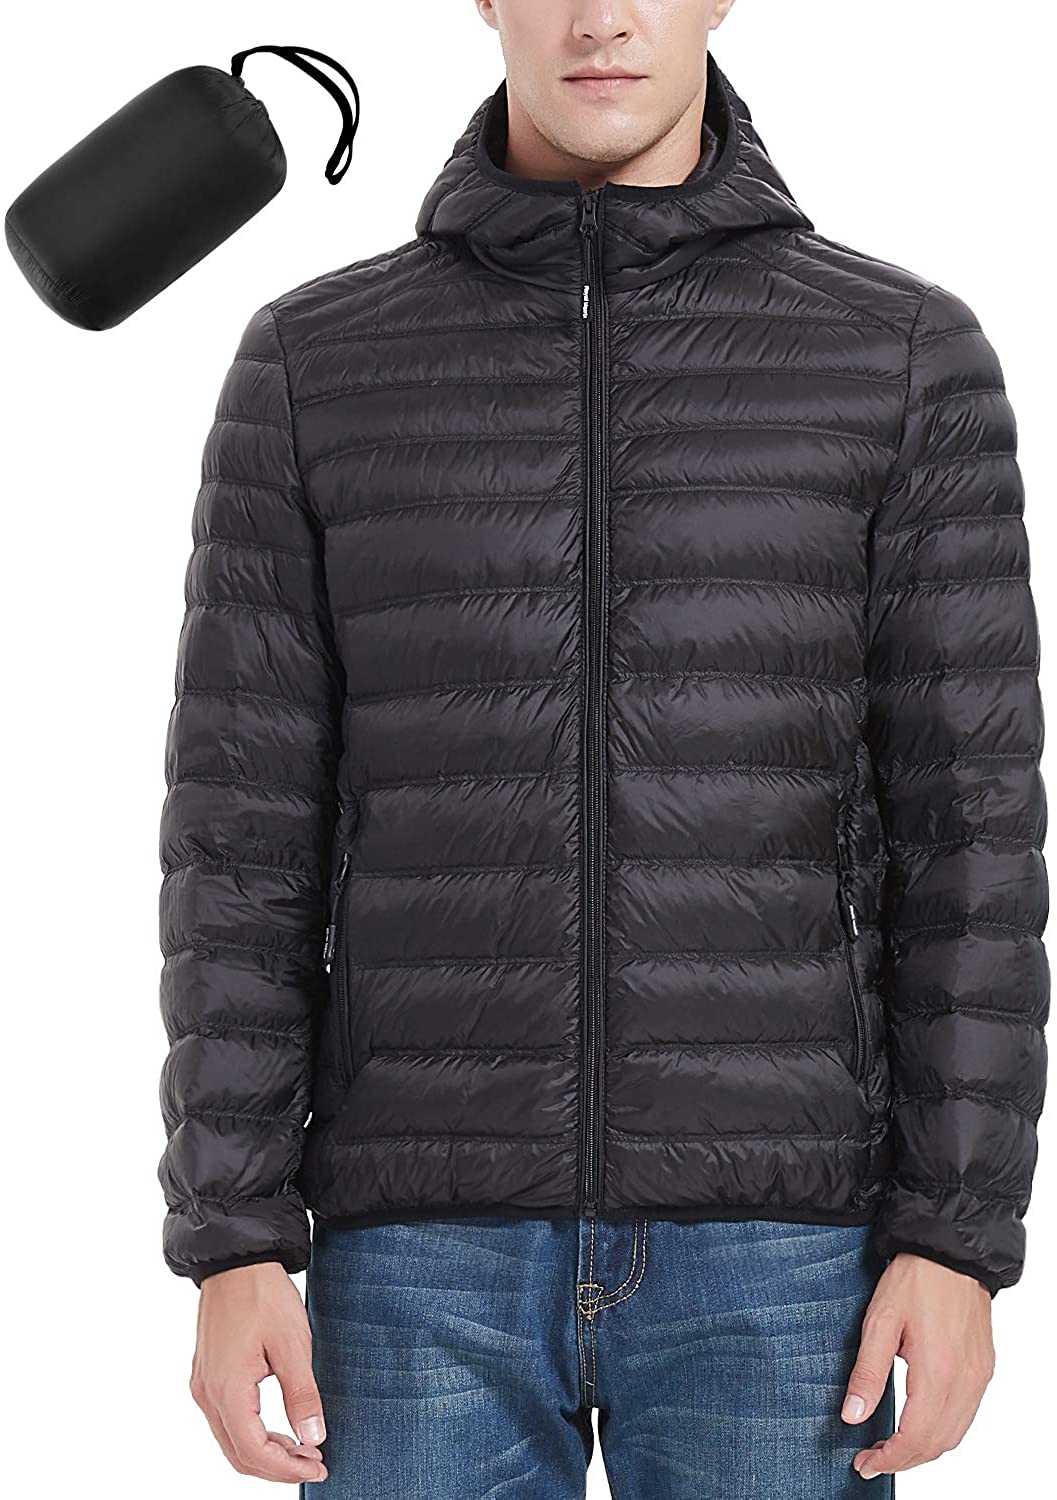 Mens Matrix Fashion Quilt Puffer Jacket Padded Warm Hooded Outdoor Winter Coat 